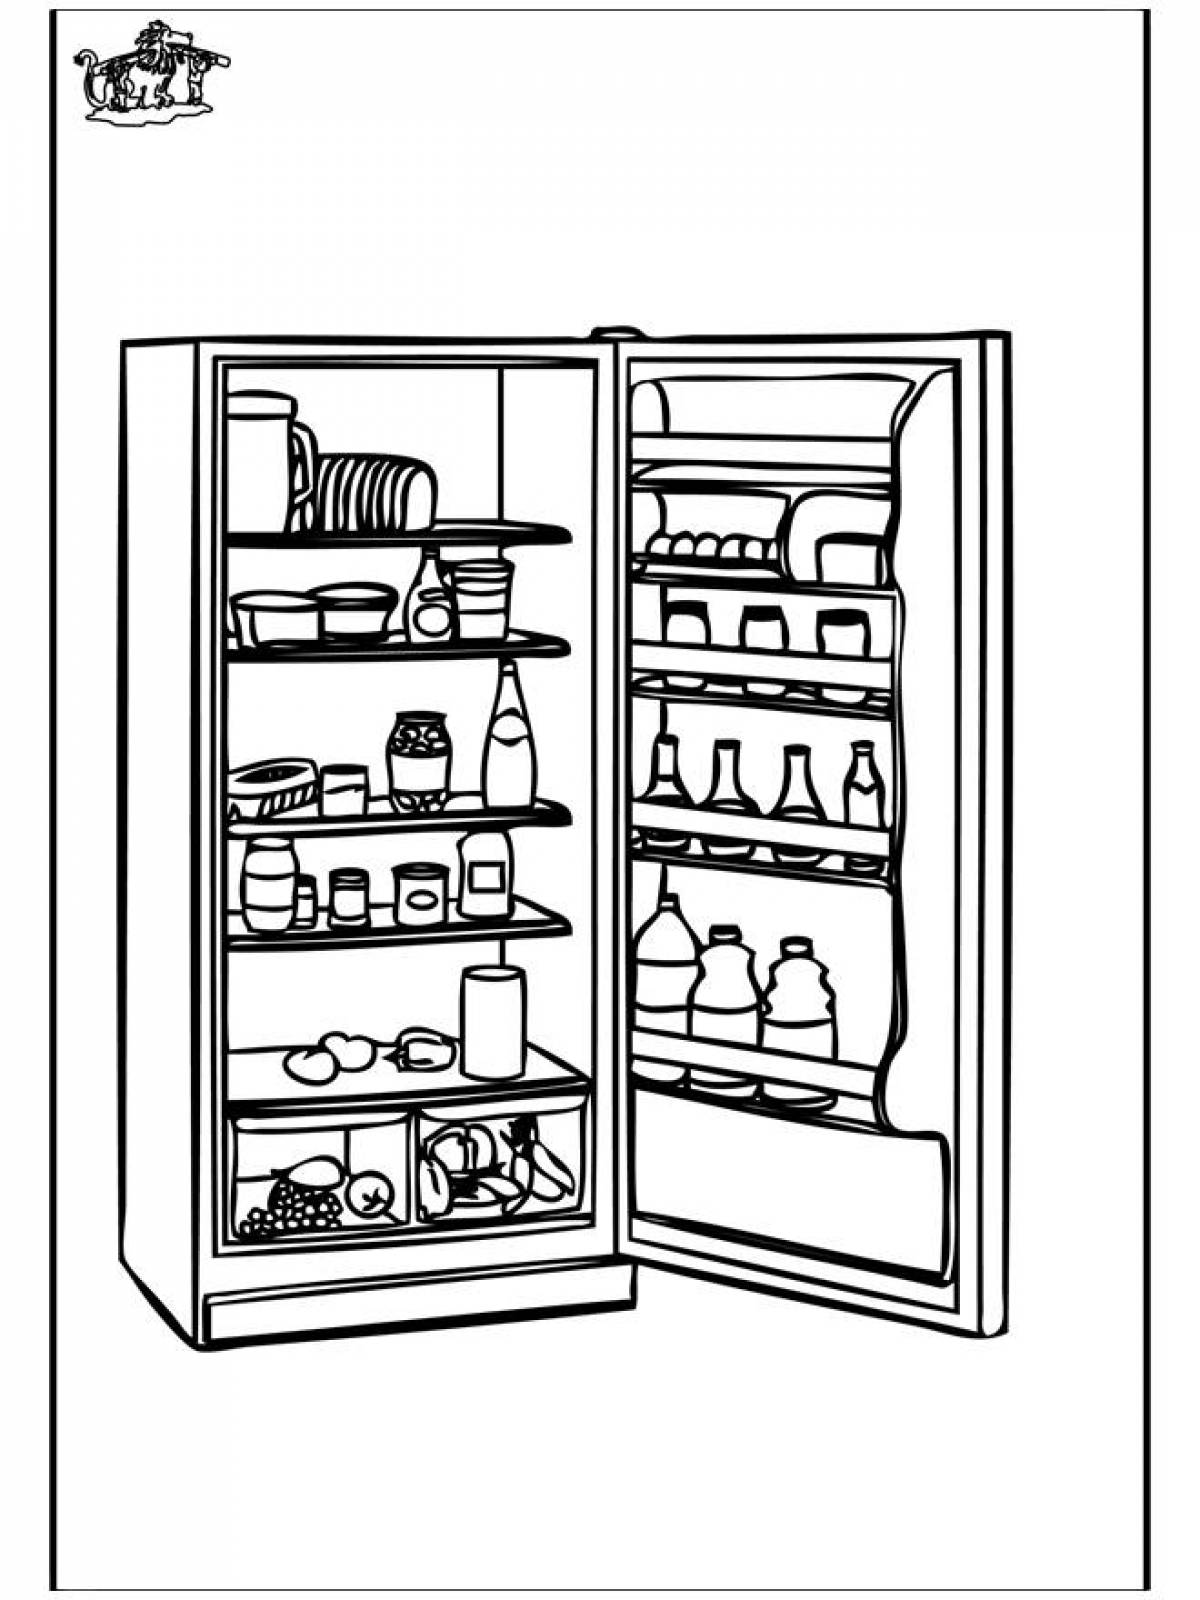 Awesome refrigerator coloring page